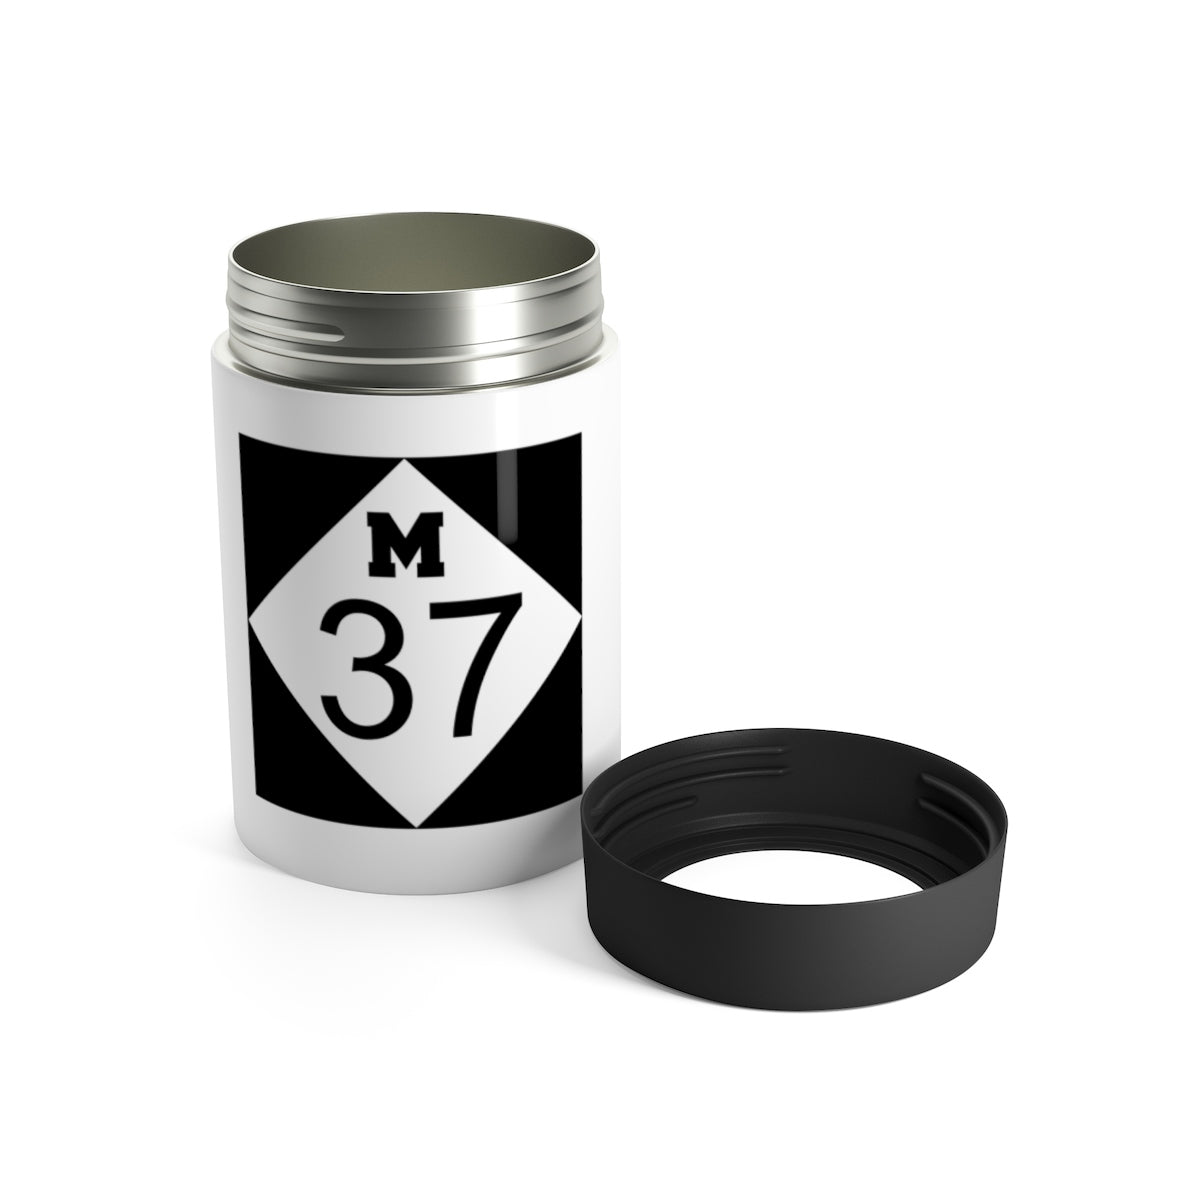 M37 White Stainless Steel Can Holder